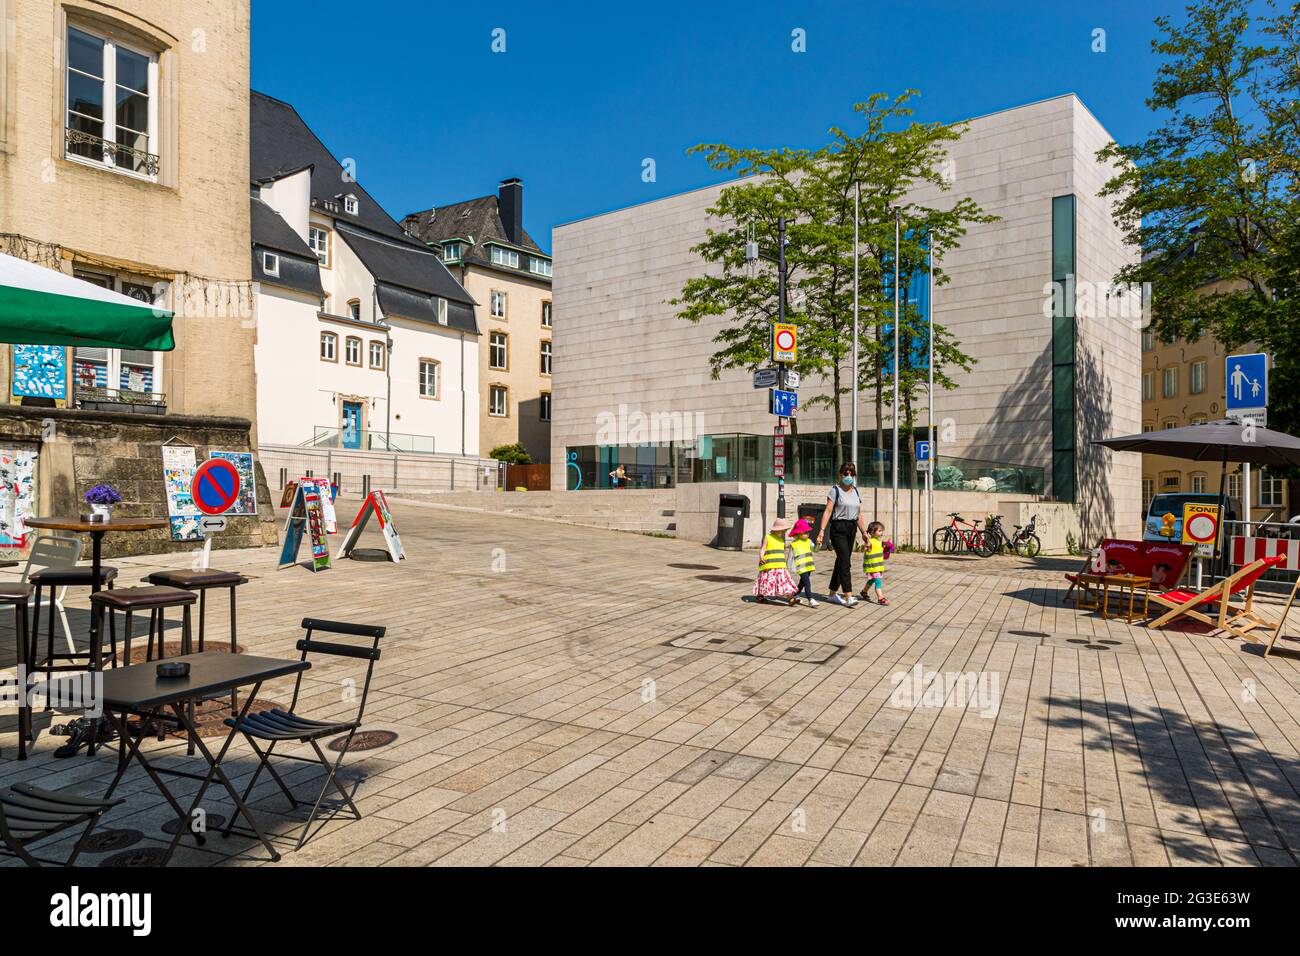 Children walk in protective clothing and their care in front of the Musée national d'histoire et d'art Luxembourg Stock Photo